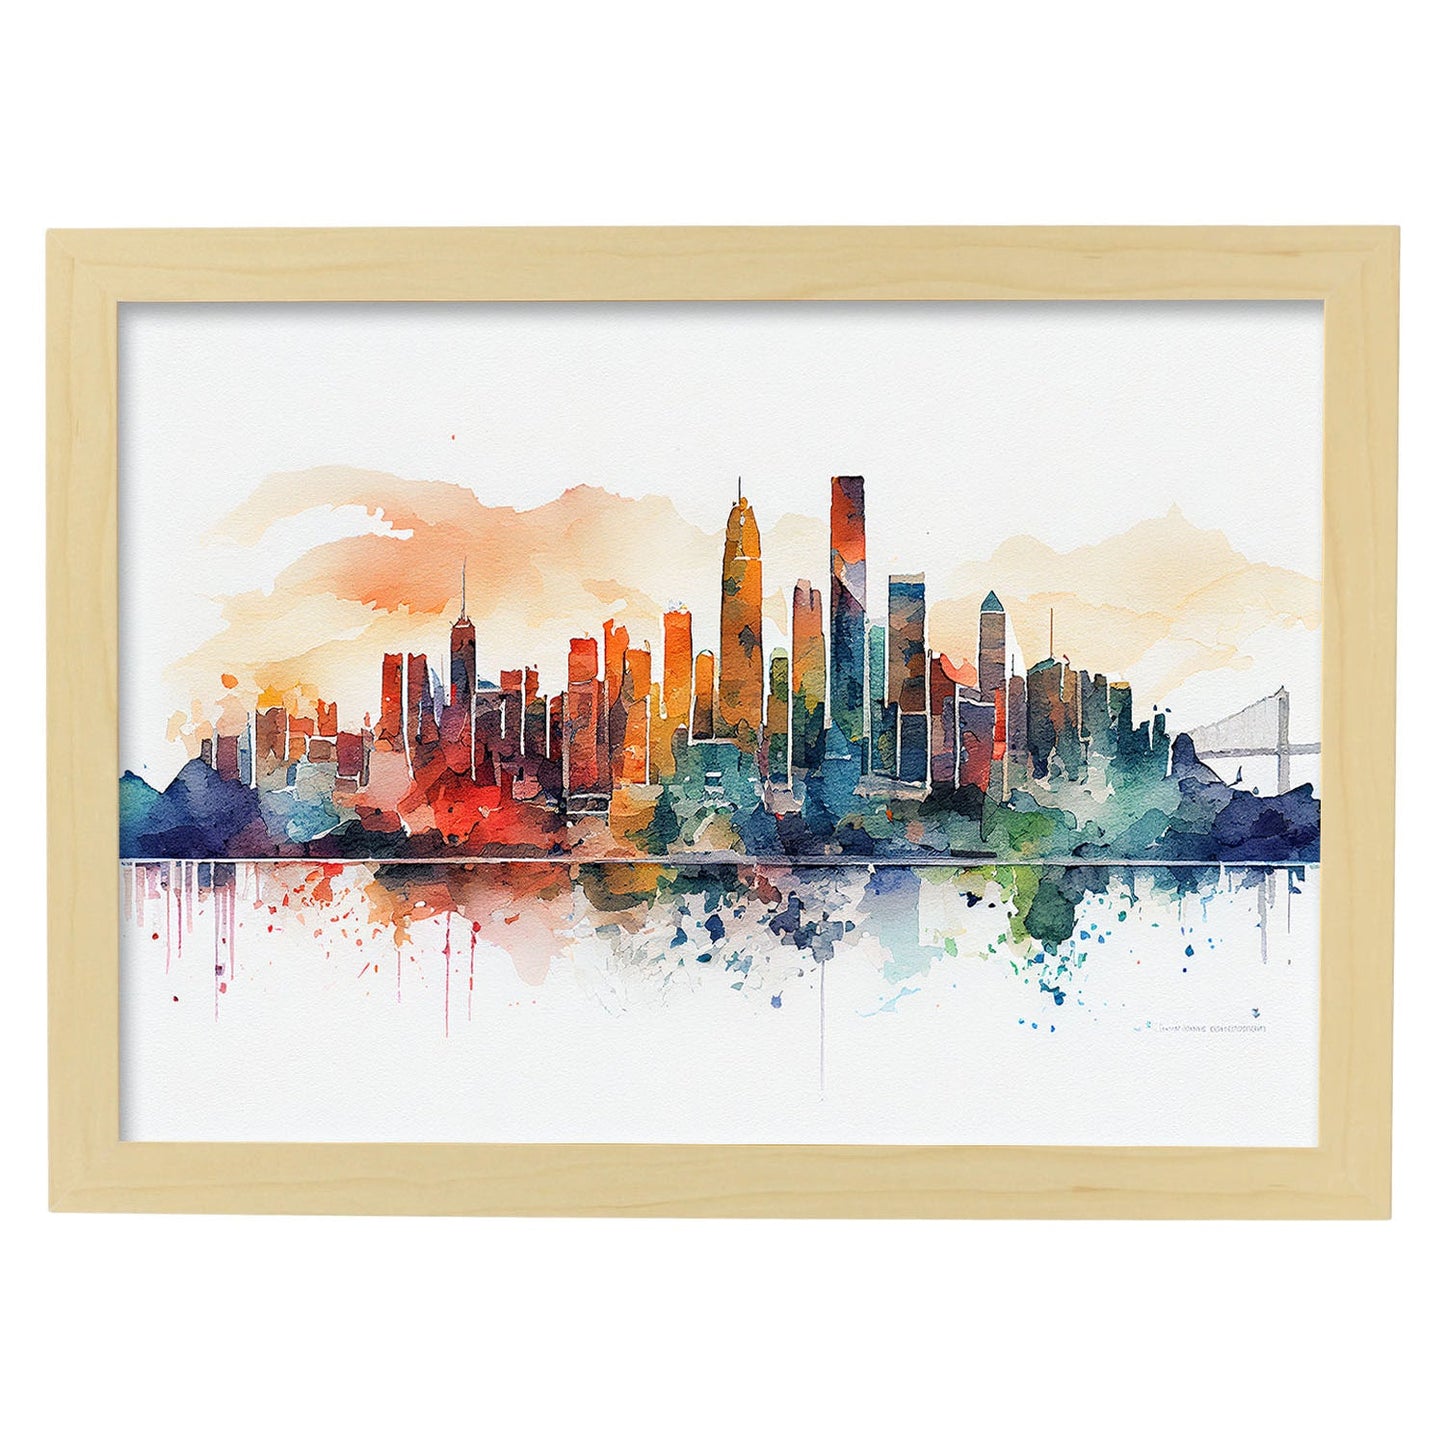 Nacnic watercolor of a skyline of the city of Hong Kong_1. Aesthetic Wall Art Prints for Bedroom or Living Room Design.-Artwork-Nacnic-A4-Marco Madera Clara-Nacnic Estudio SL